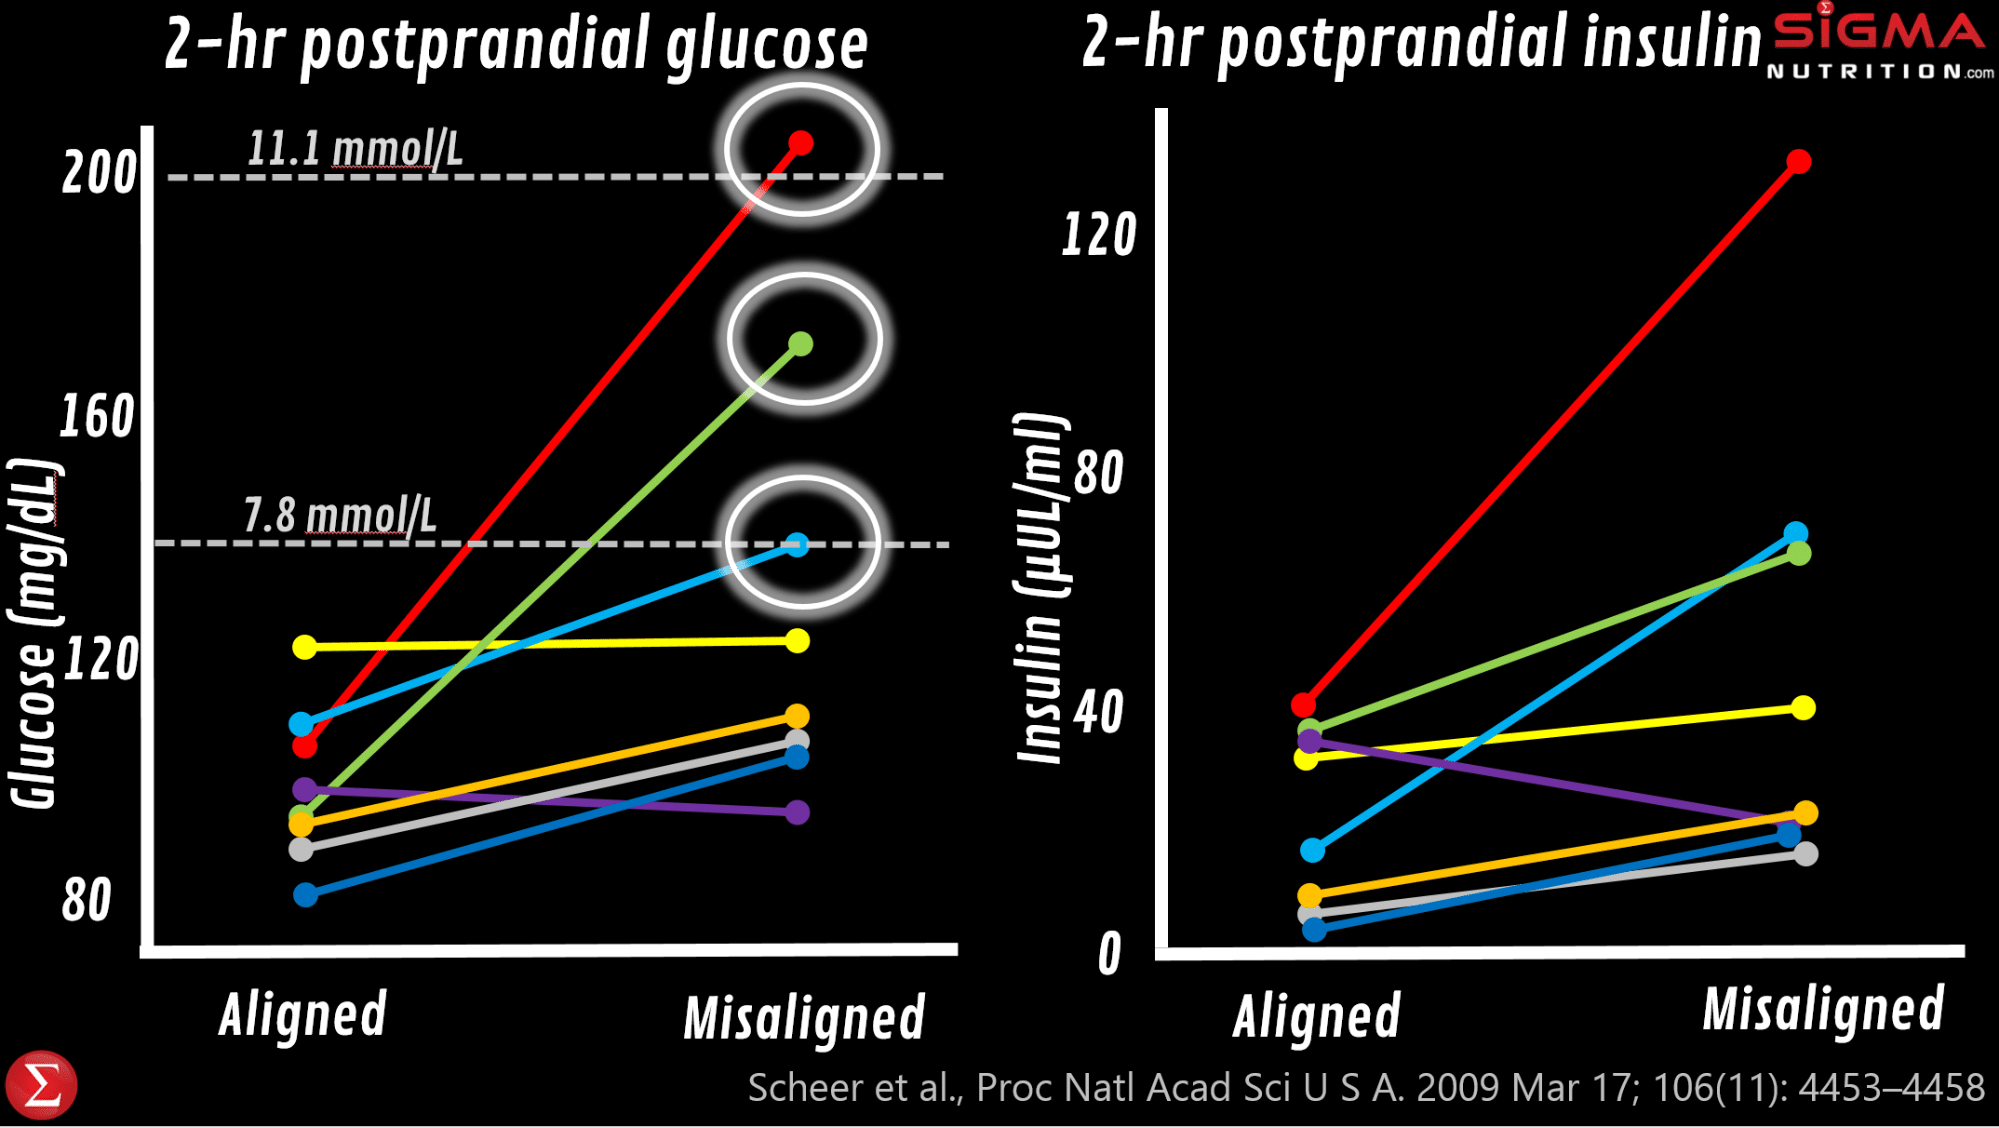 chrononutrition hen someone is in circadian misalignment, they will have elevated glucose, elevated insulin, a completely flipped cortisol rhythm, significantly lower leptin levels